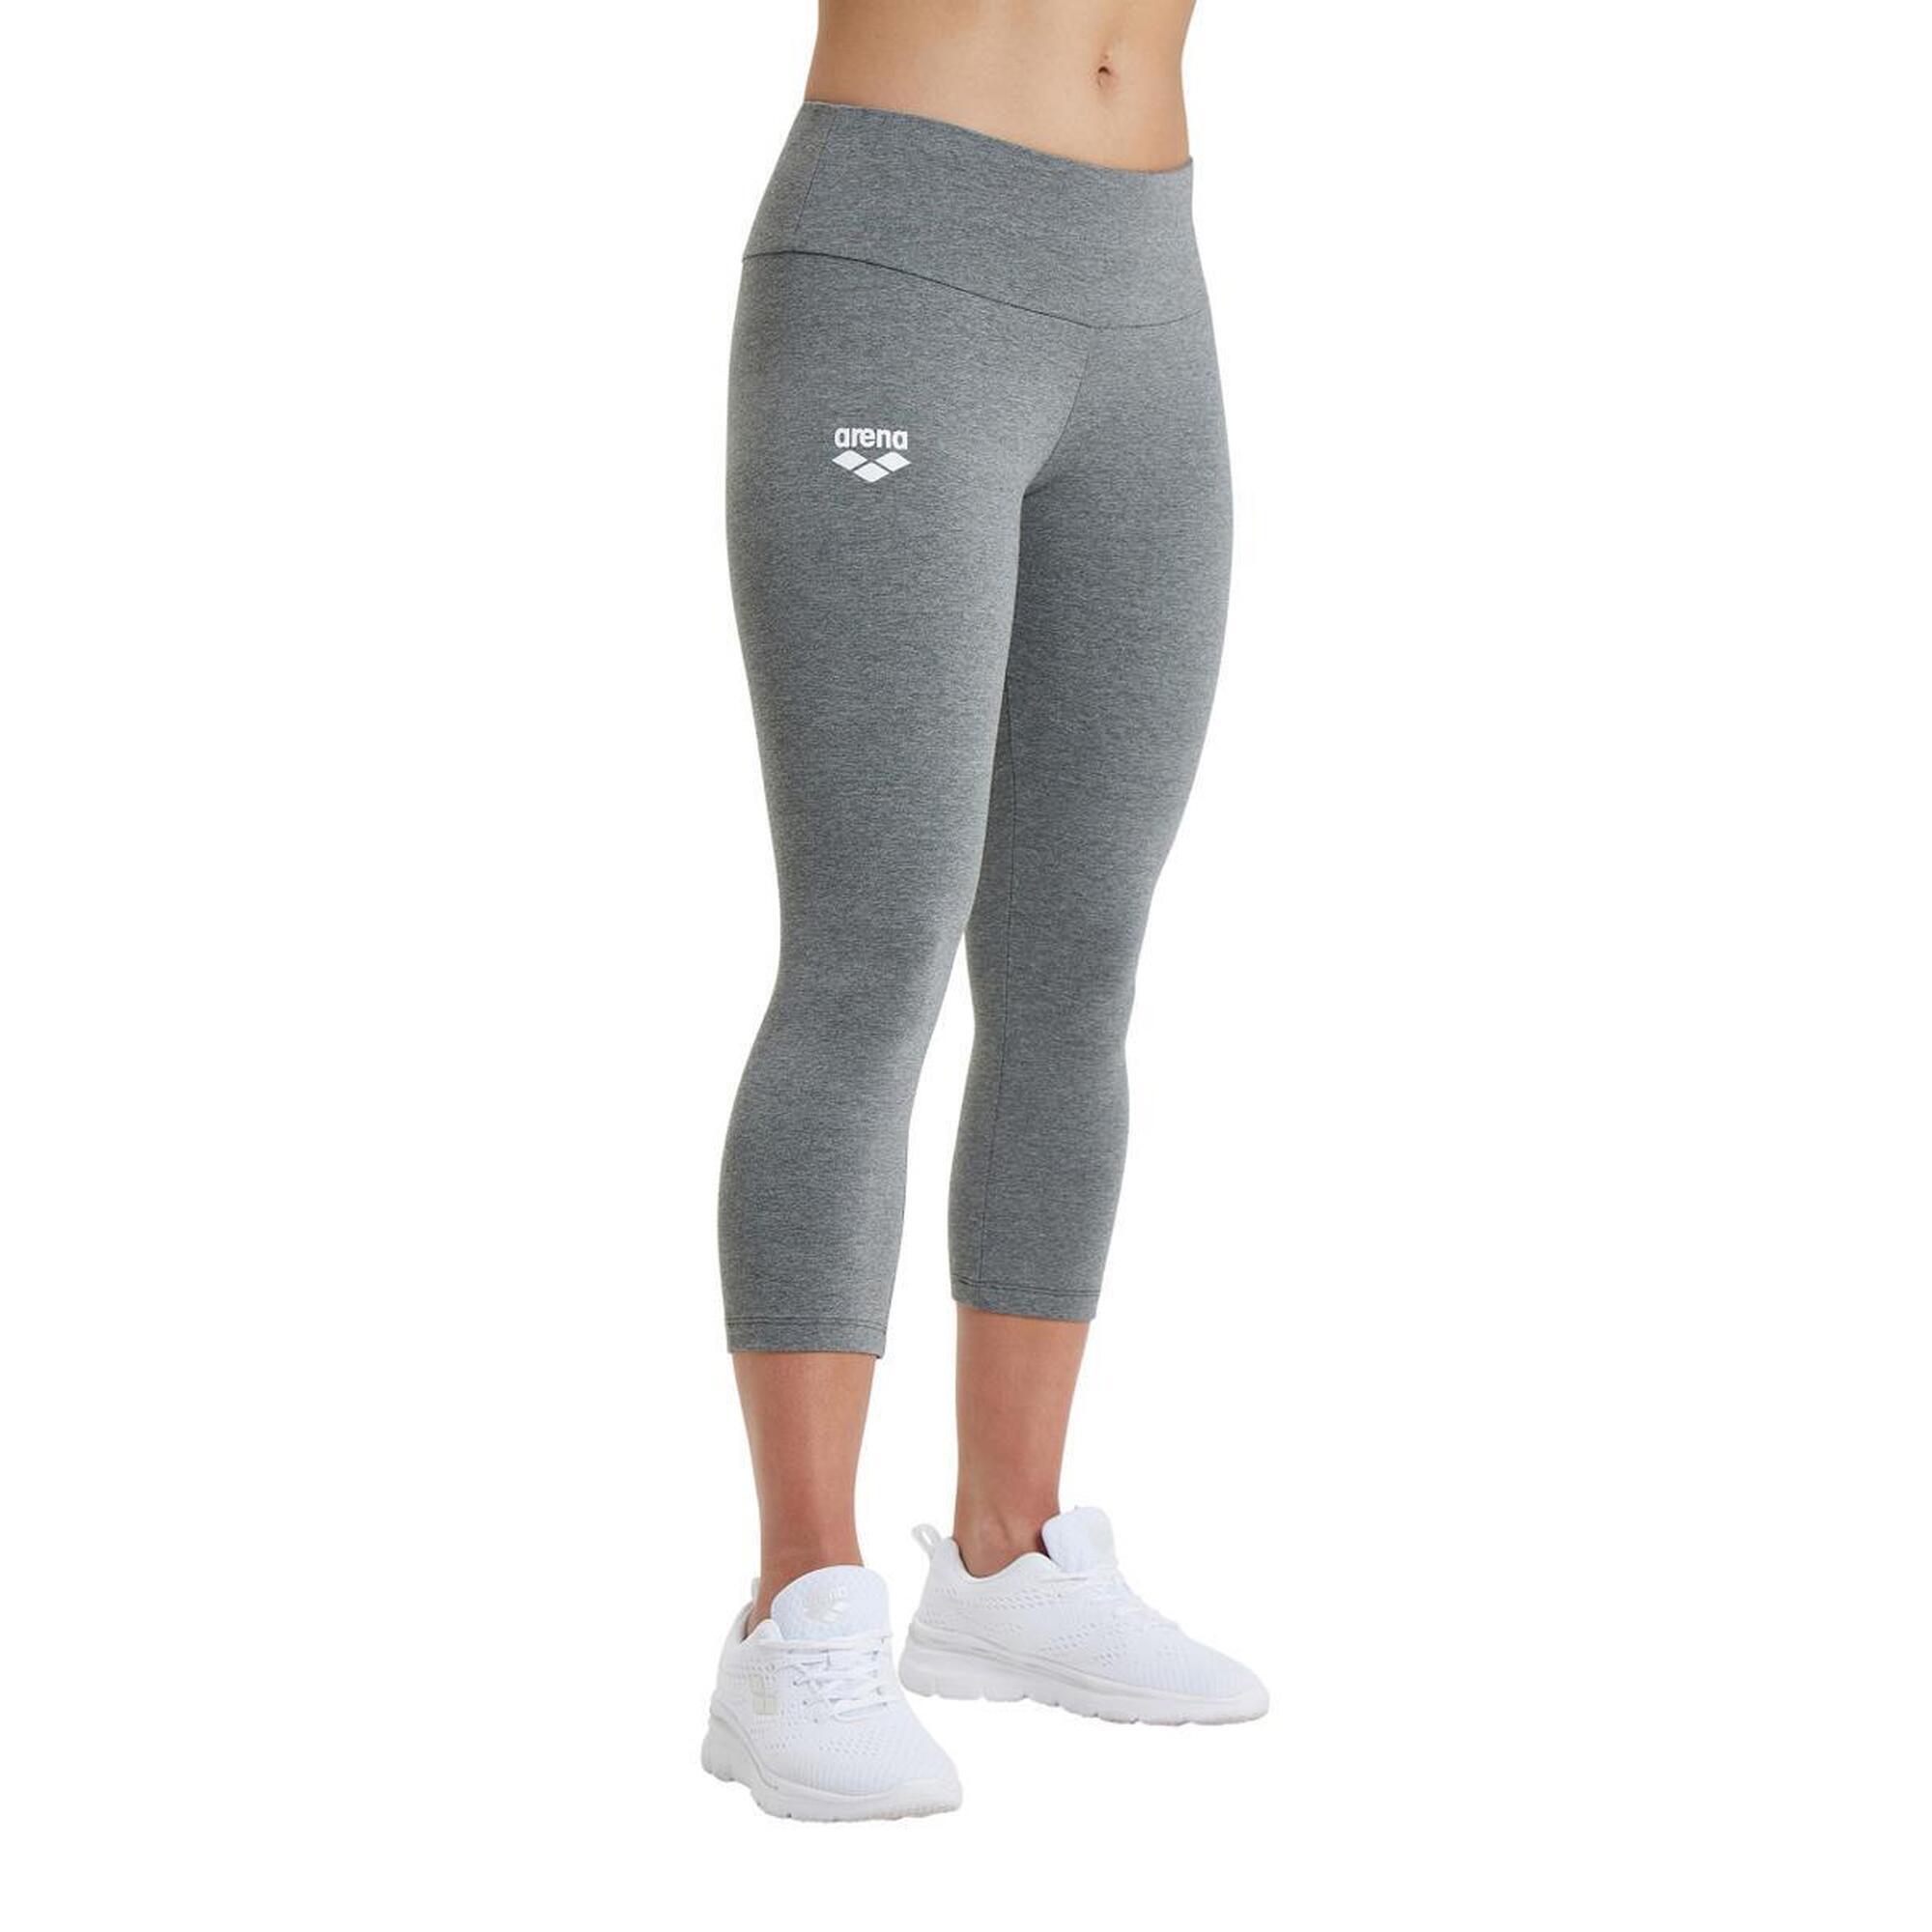 Buy Cukoo Black Relaxed Fit Capris for Women's Online @ Tata CLiQ